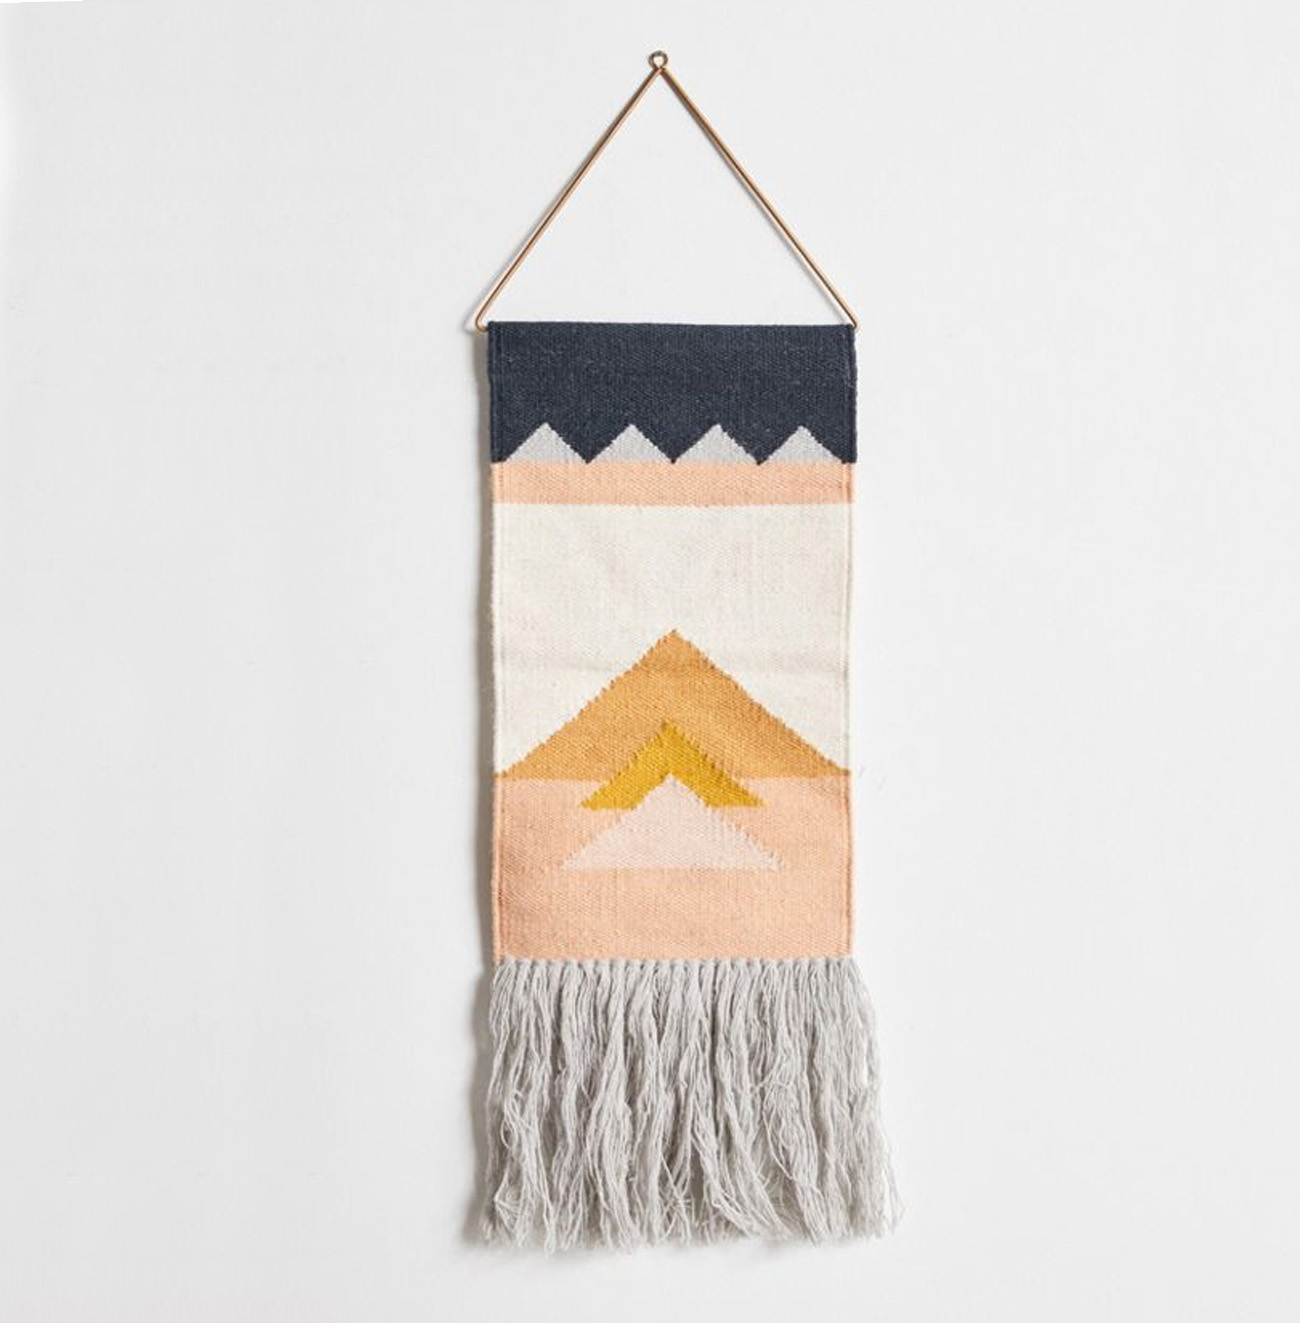 Cleo Wall Hanging from Urban Outfitters